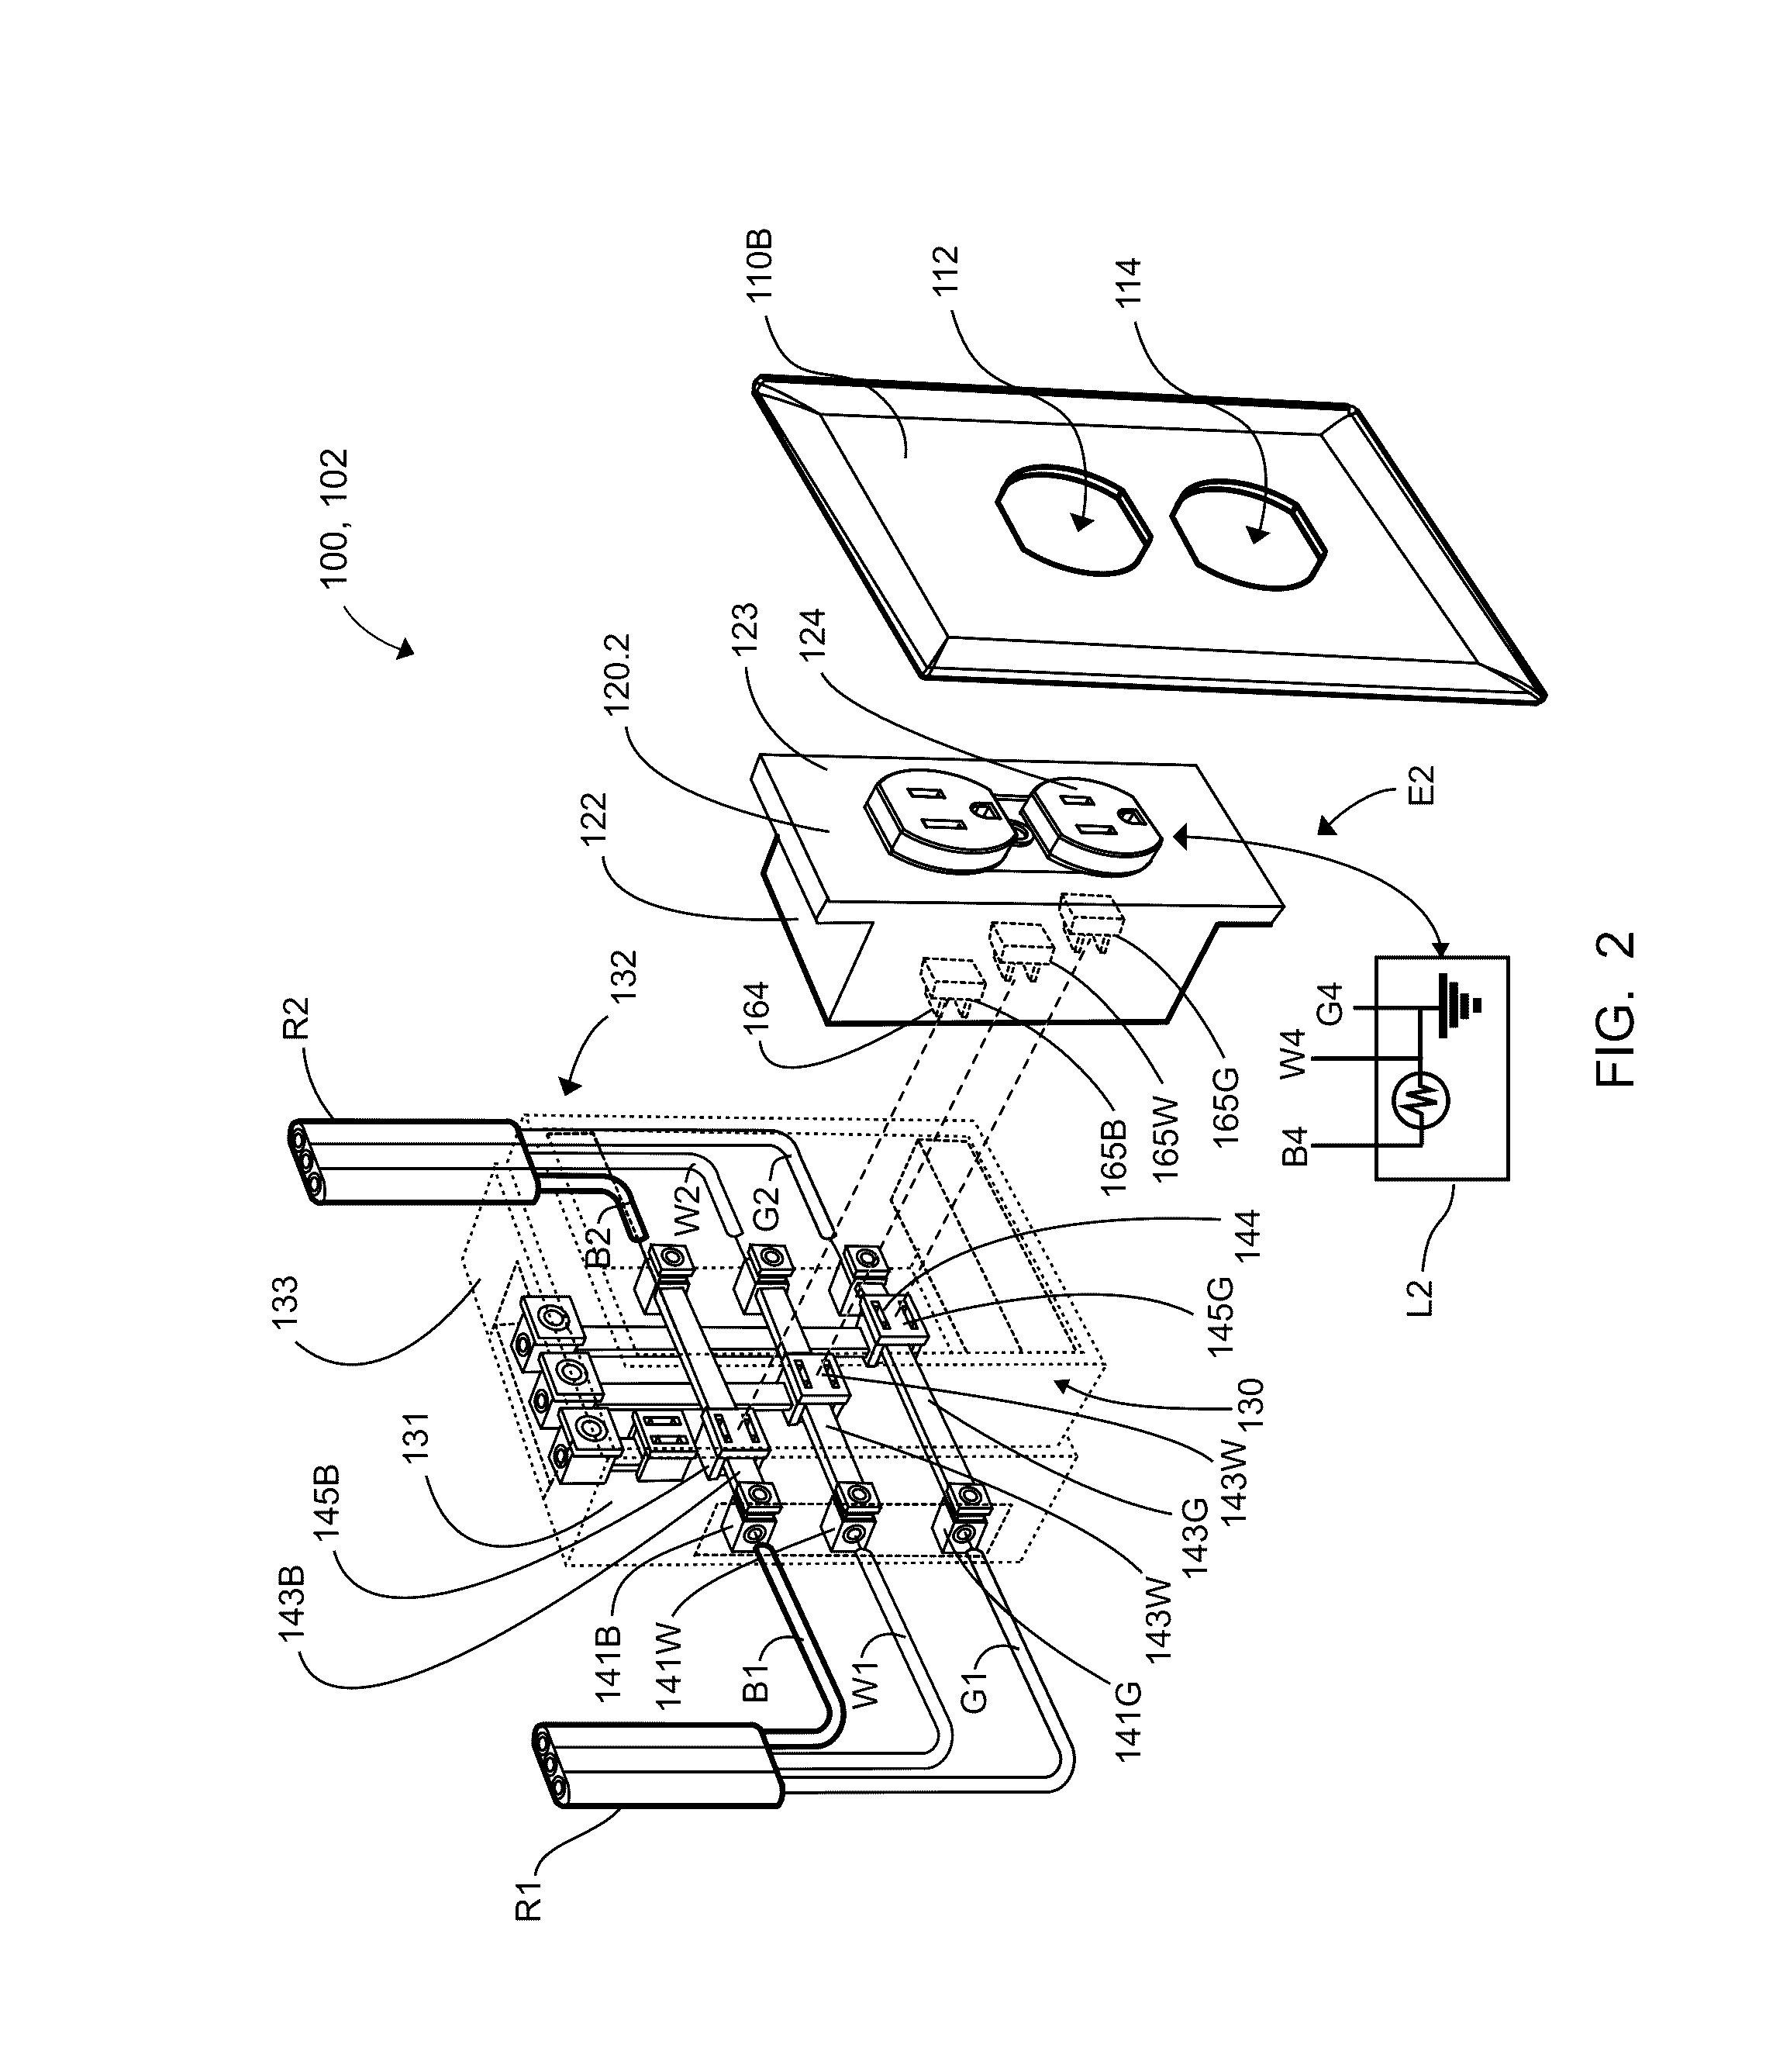 Pluggable electrical receptacle and universal wall box and methods of use thereof